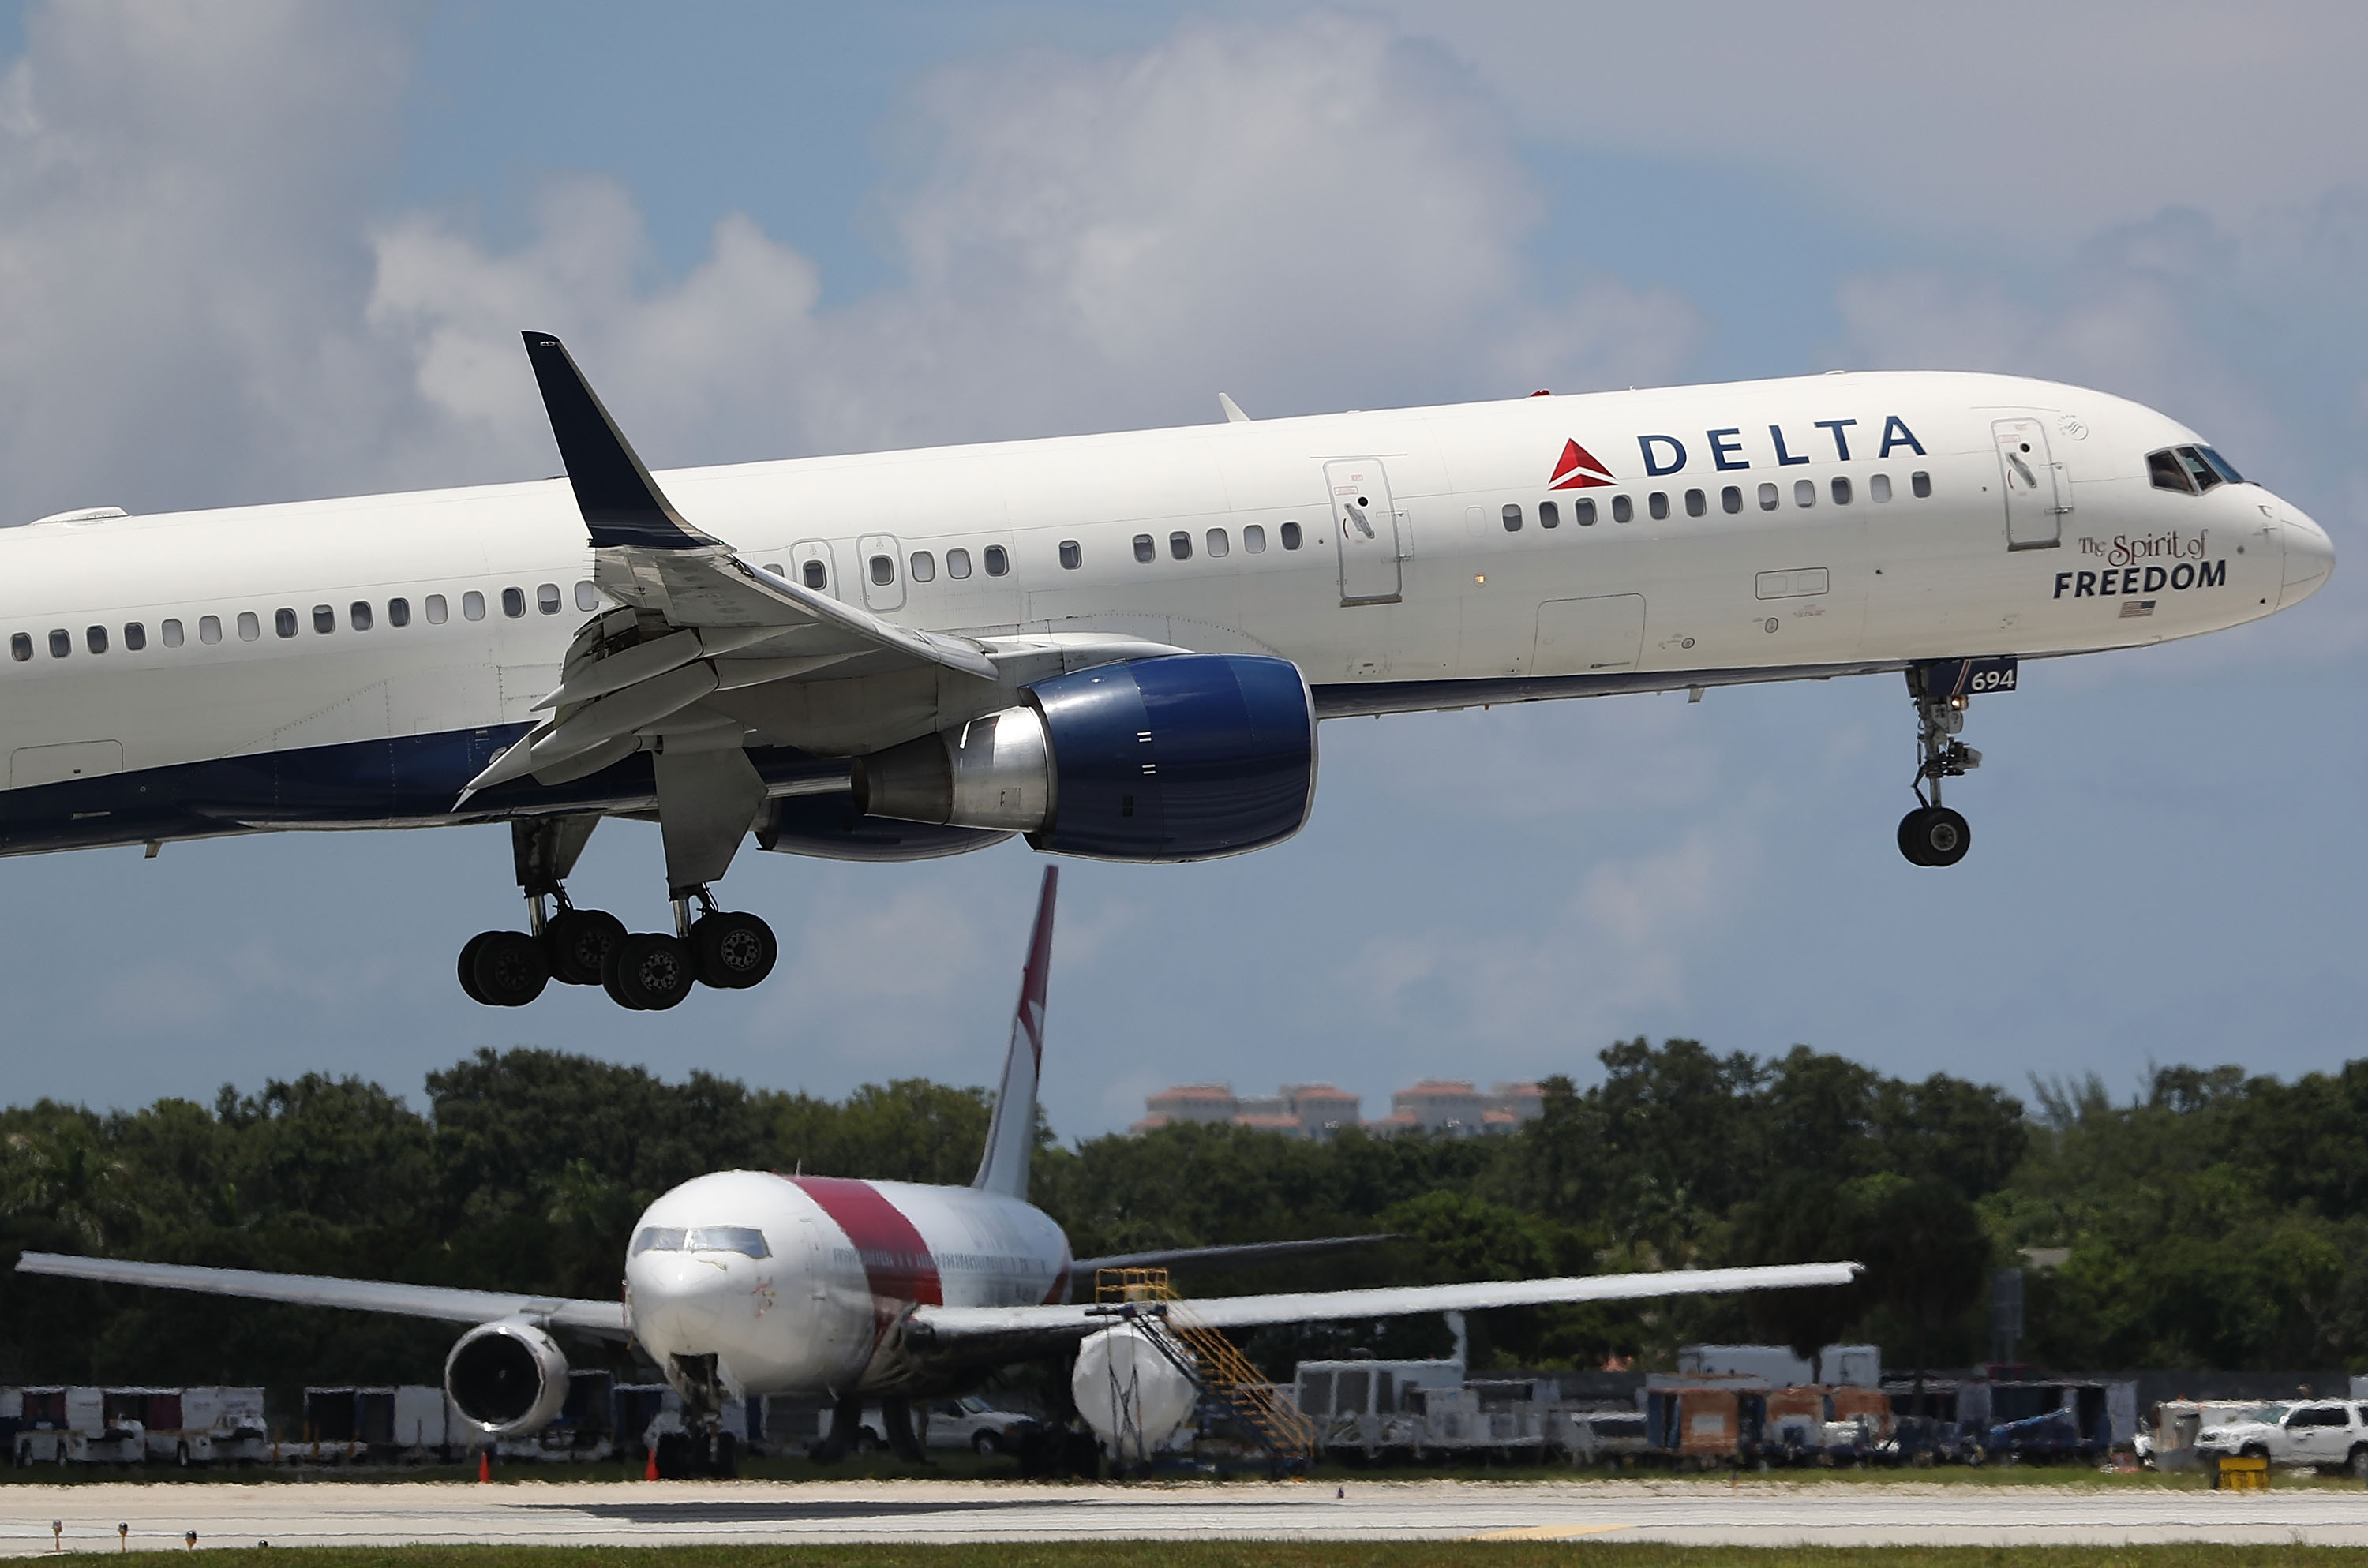 Delta Announces Quarterly Earnings And Reductions In Capacity Over Brexit